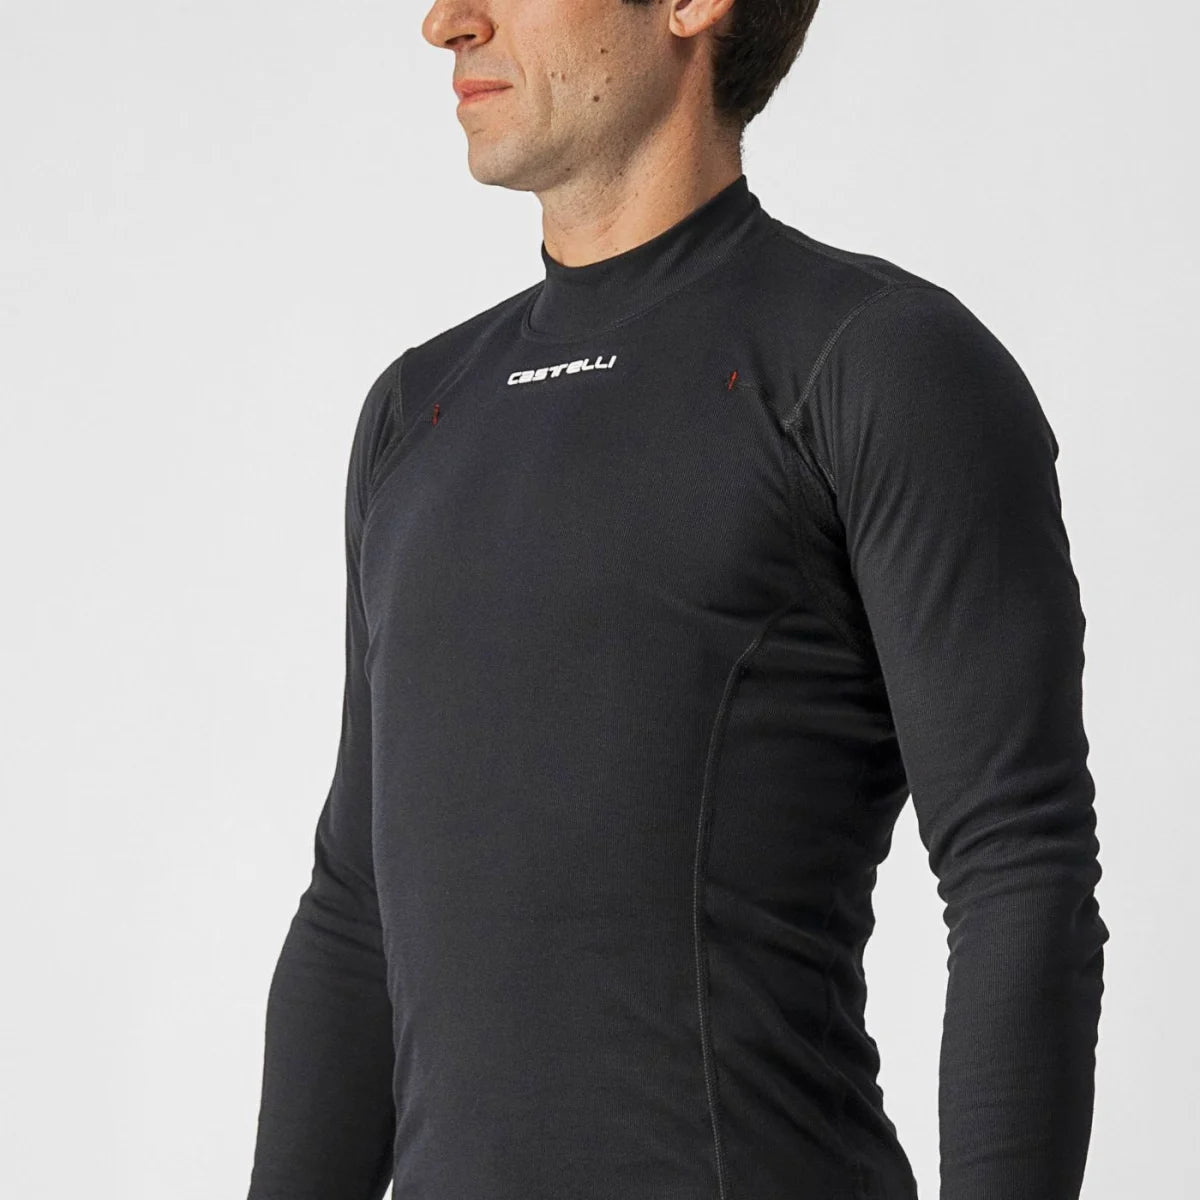 Men's cycling Base Layer – The Cyclist